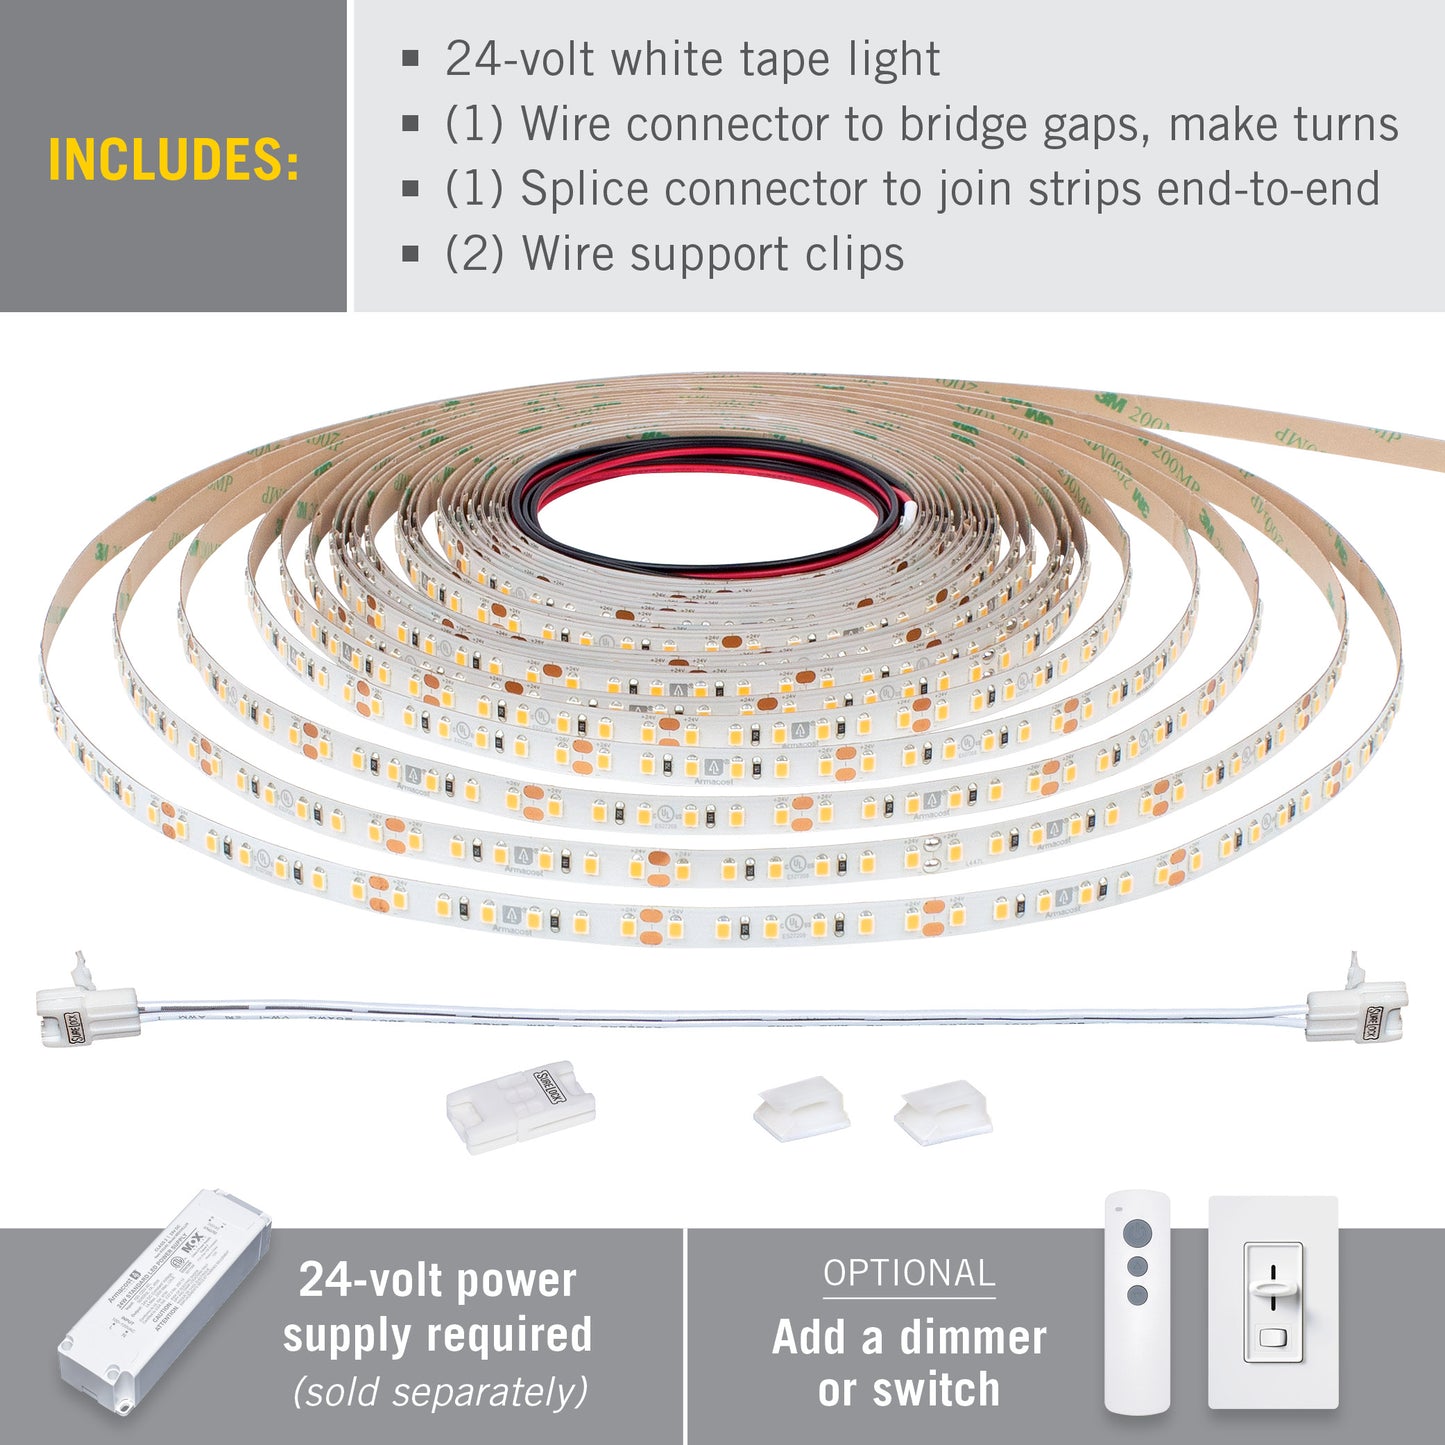 LED Strip Lights Unveiled: Your Guide to Constant Voltage